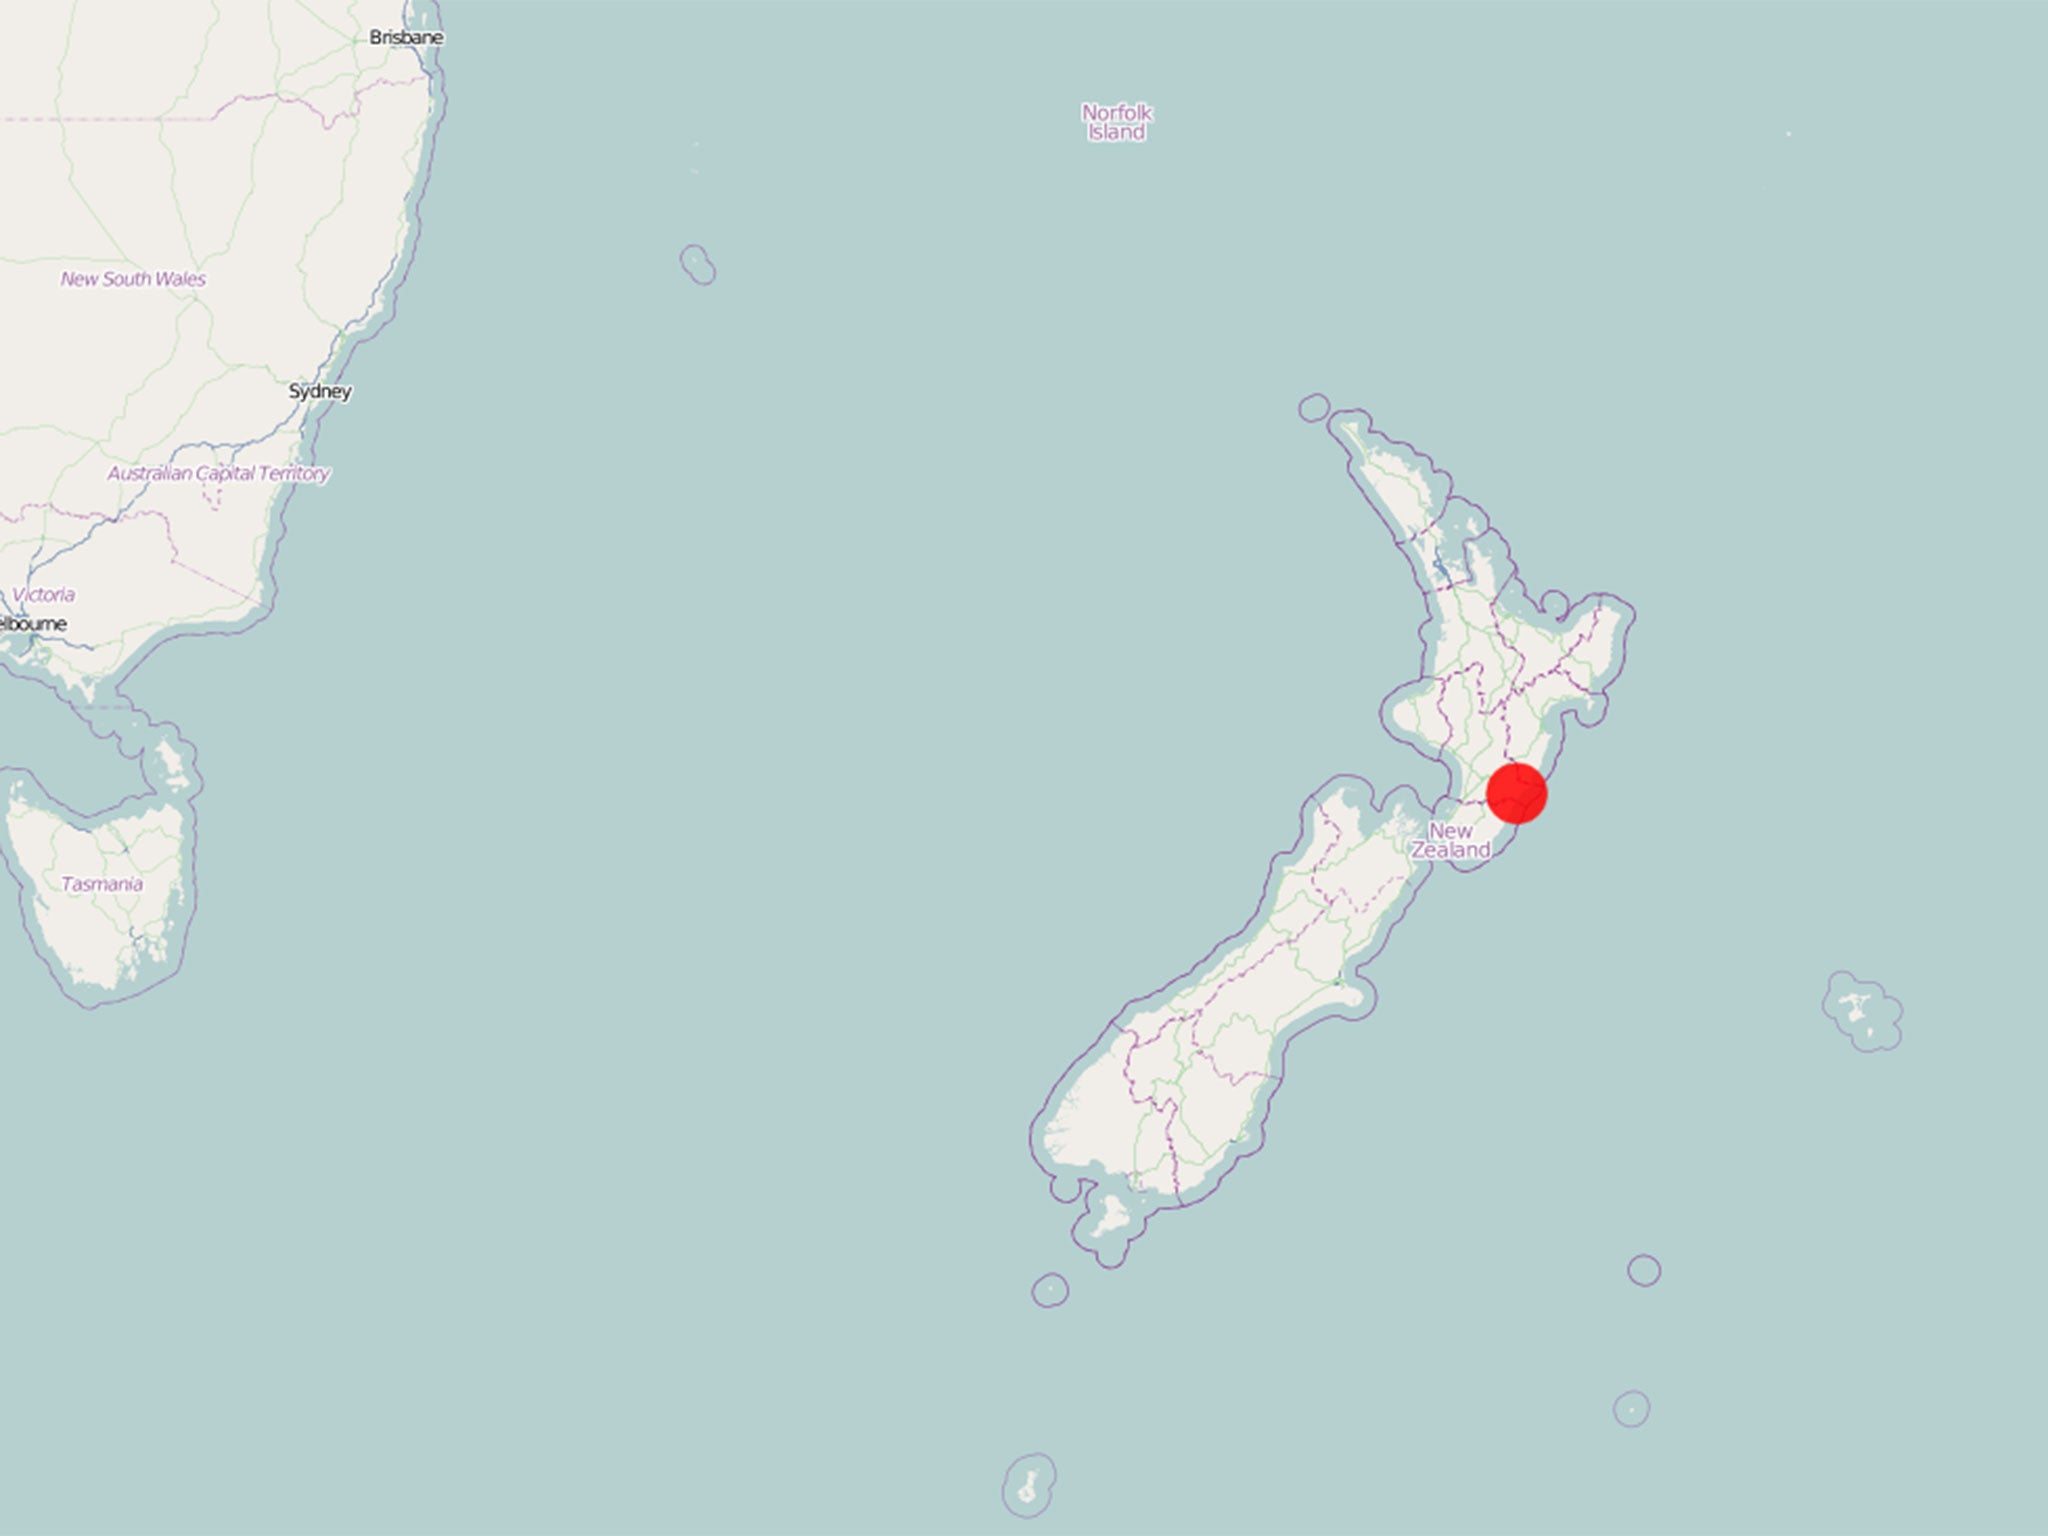 The quake registered as magnitude 5.8 with New Zealand's GeoNet monitoring agency